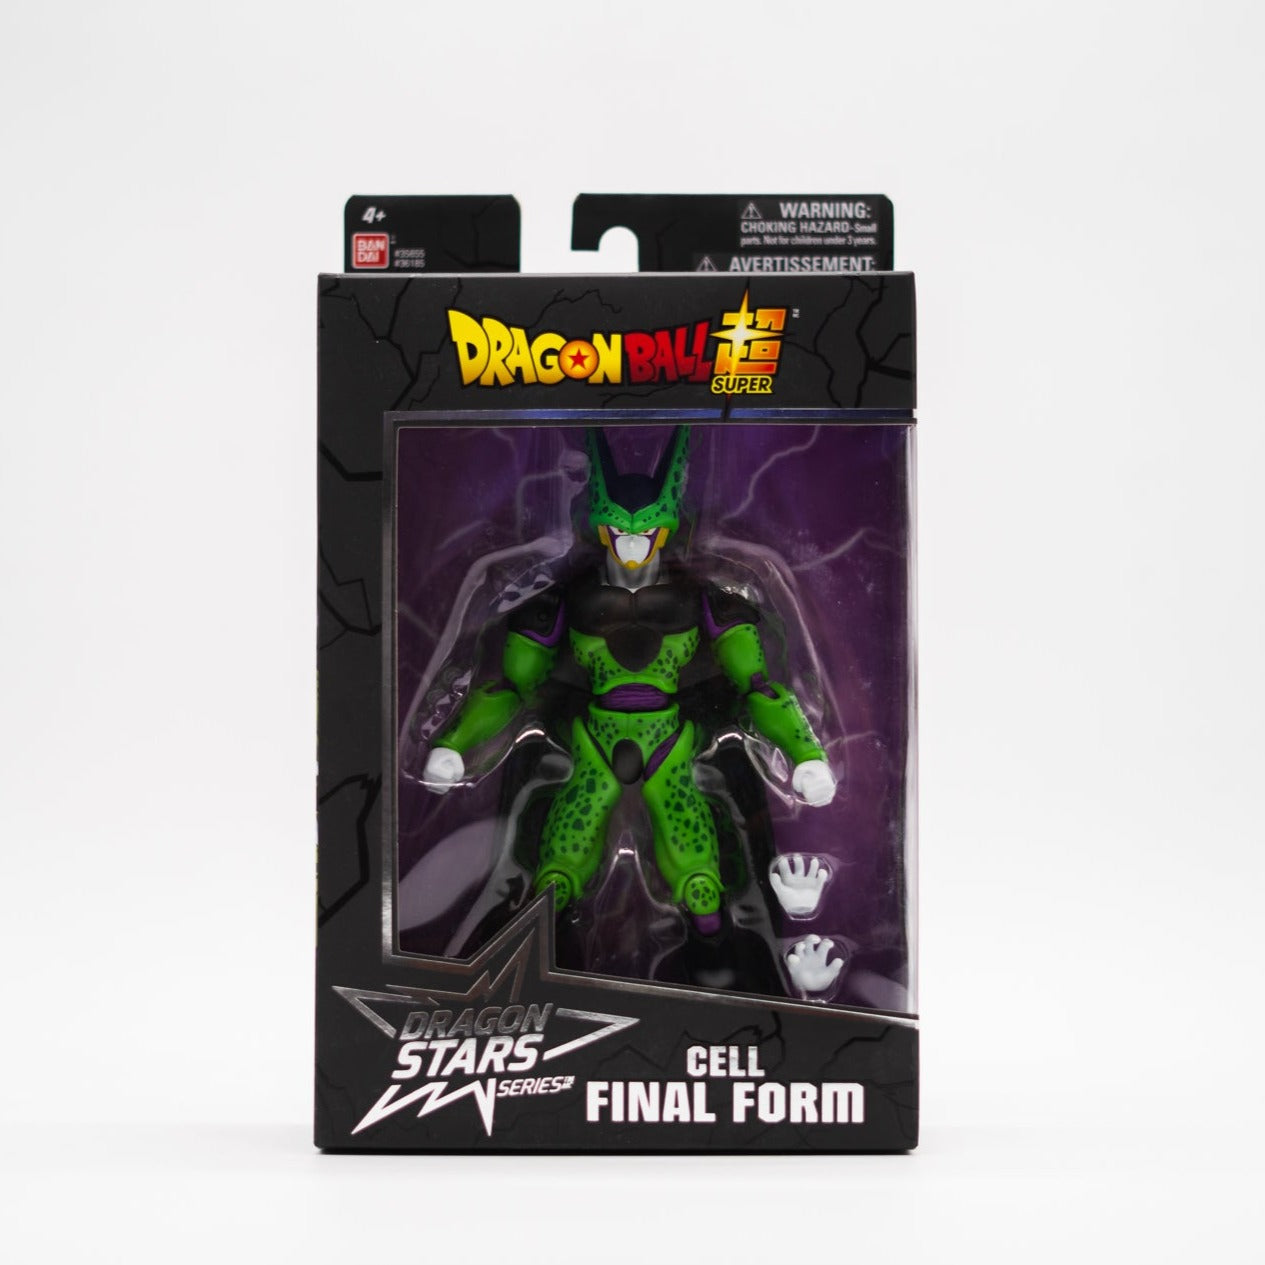 Cell Final Form - Dragon stars series